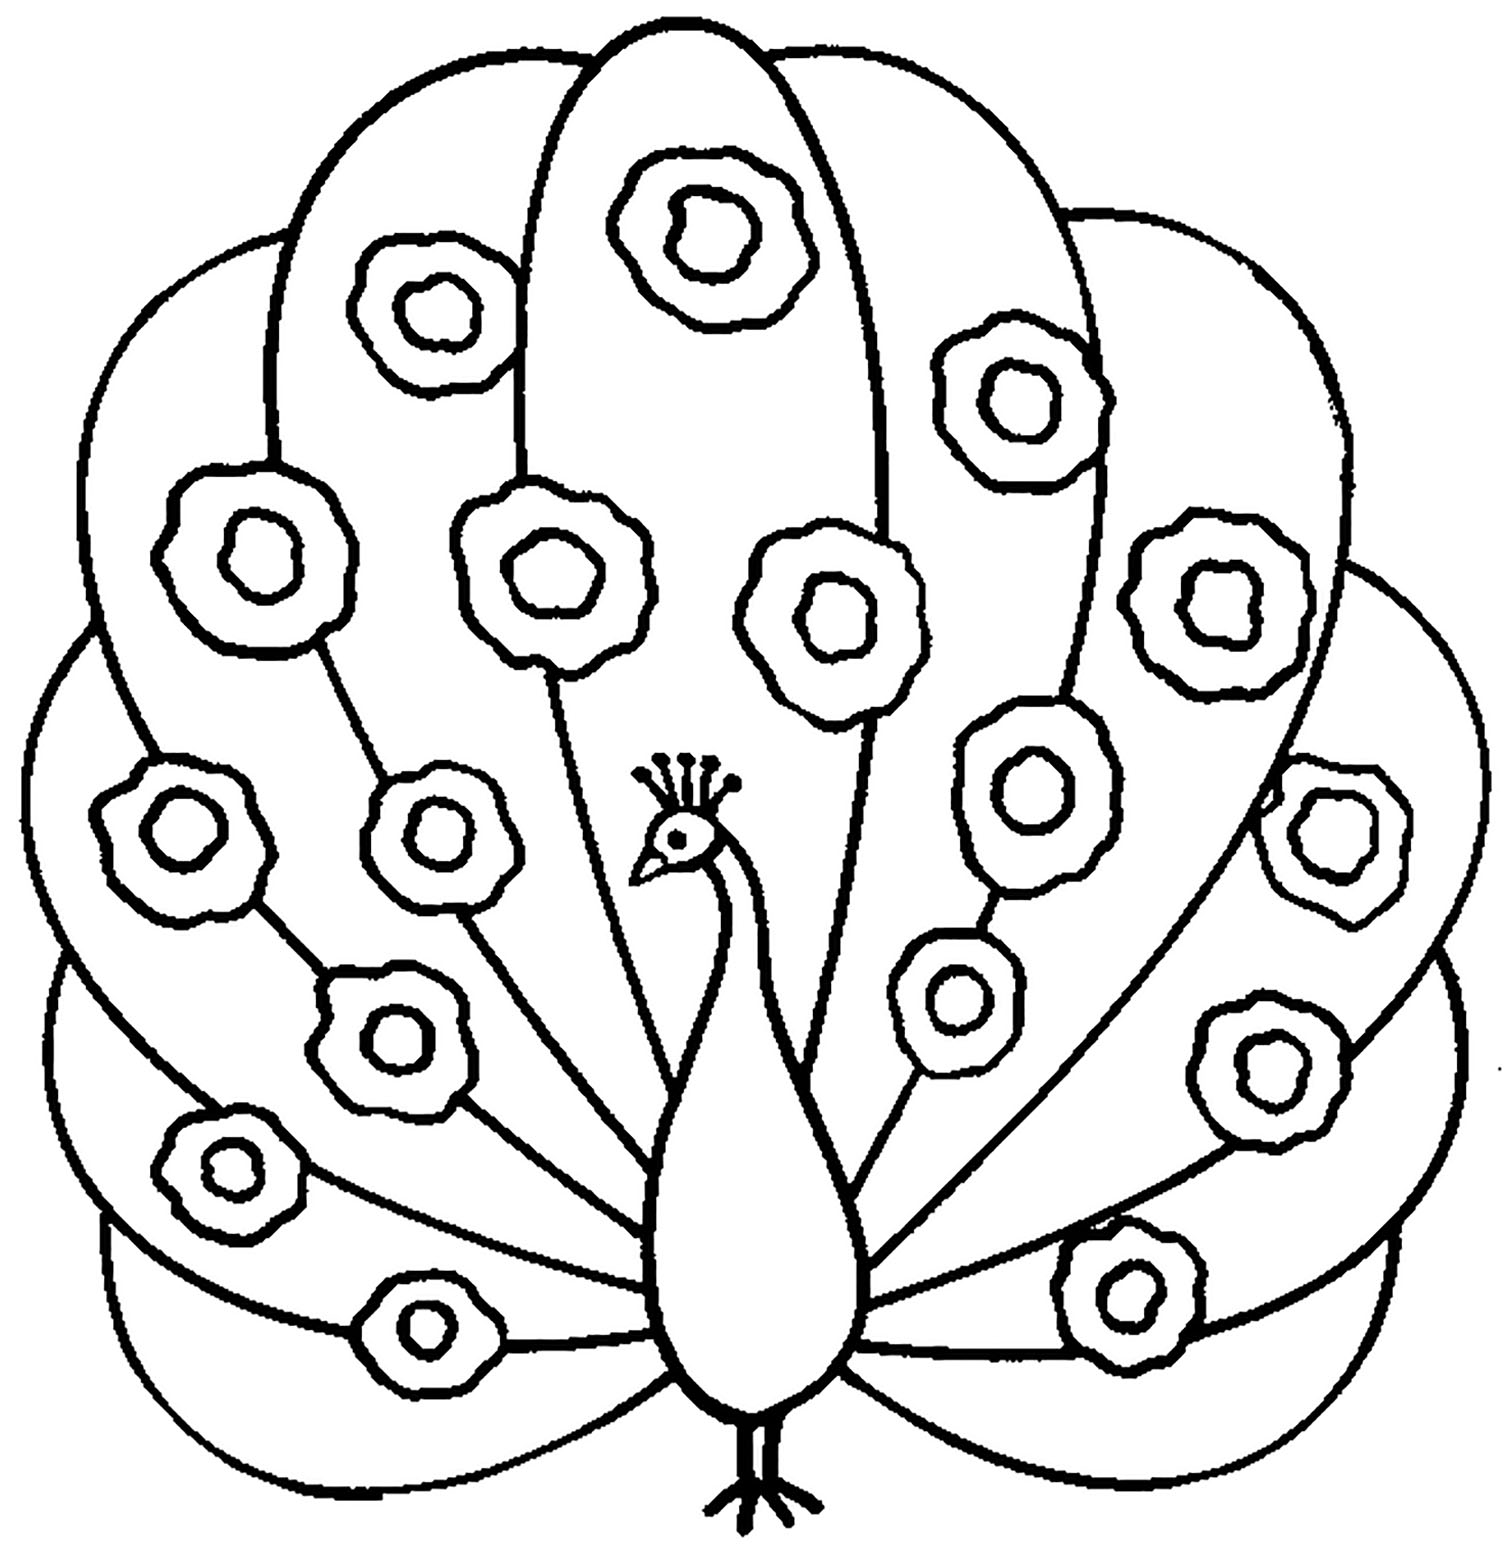 picture of peacock for colouring peacocks to download for free peacocks kids coloring pages of peacock colouring for picture 